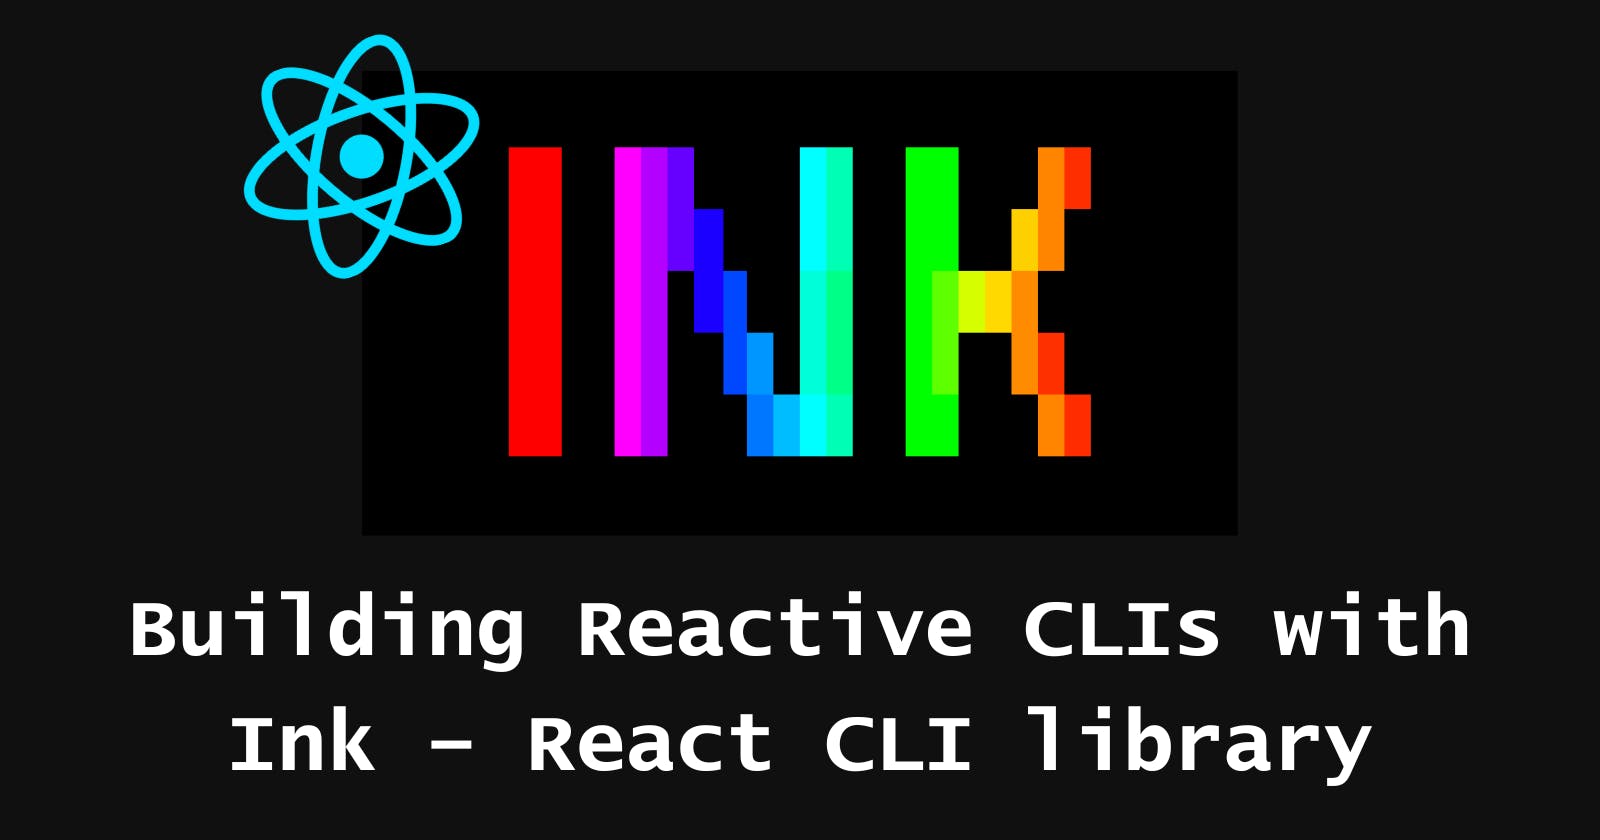 Building Reactive CLIs with Ink - React CLI library